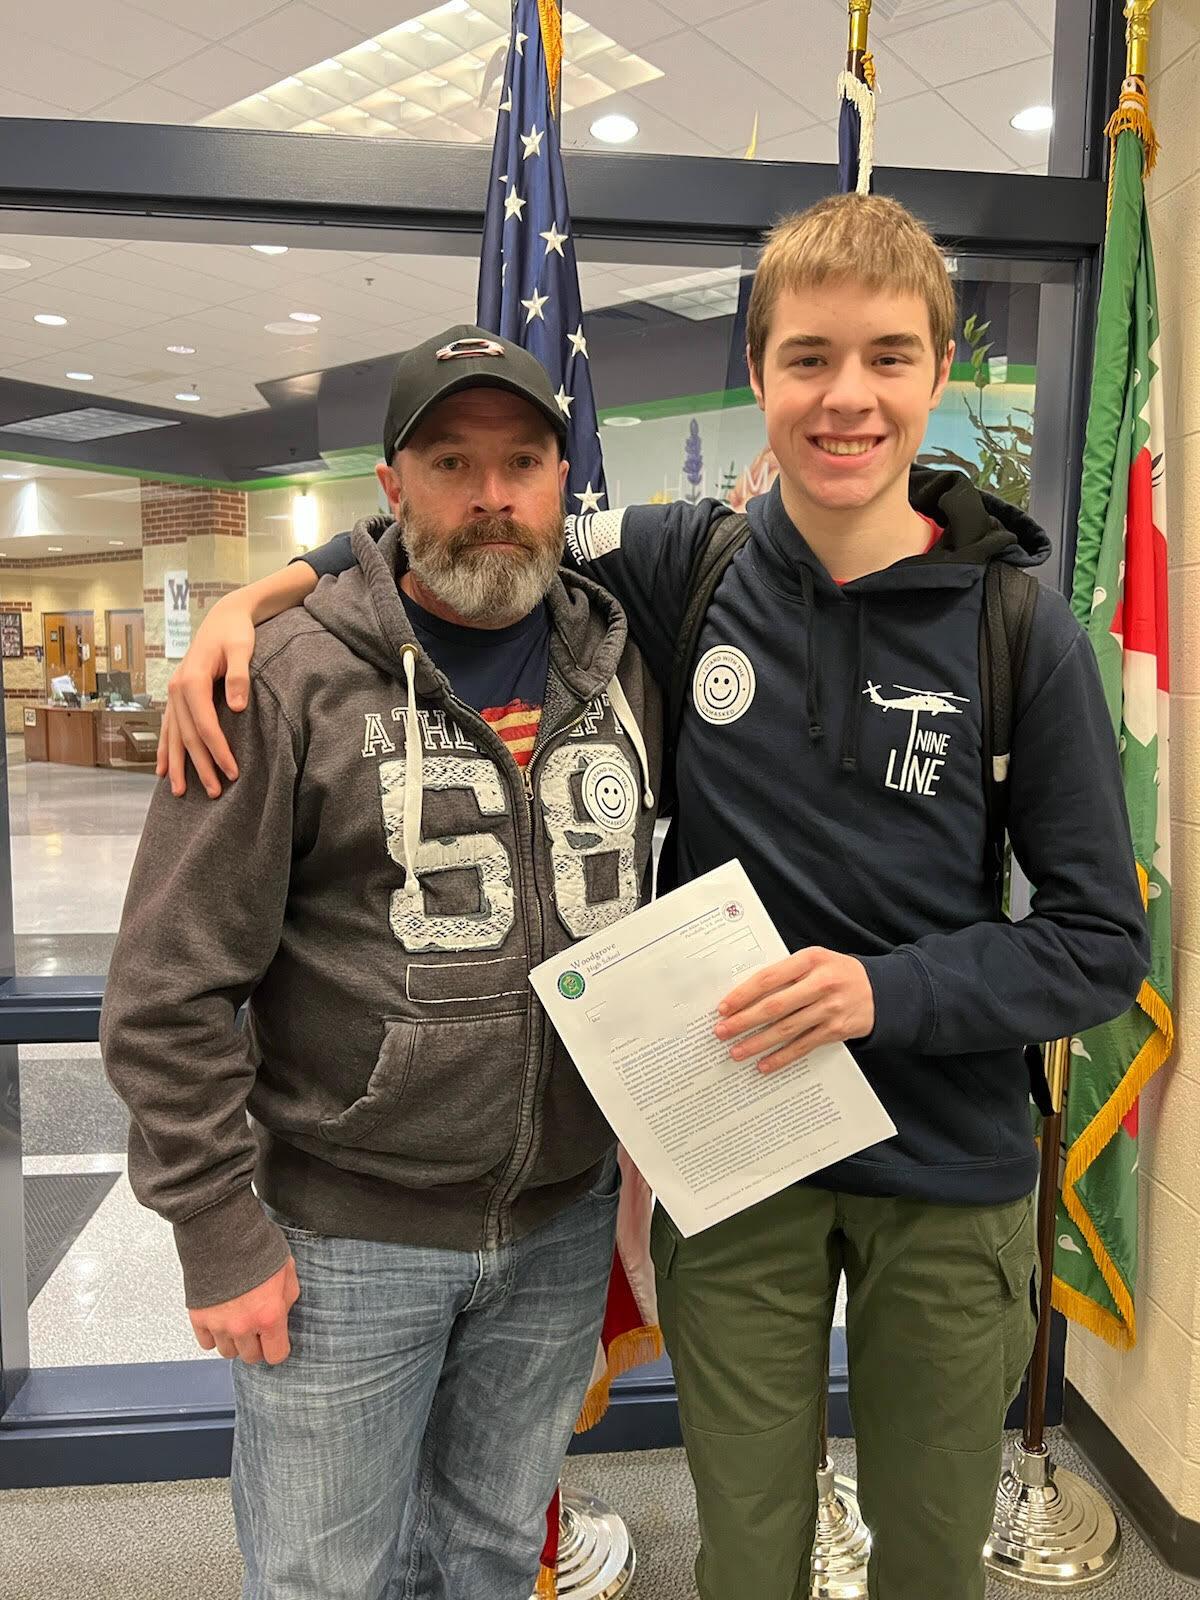 Jarod Missler (R), with his suspension letter and father, Andrew Missler, at Woodgrove High School in Purcellville, Va., on Feb. 2, 2022. (Courtesy of Andrew Missler)